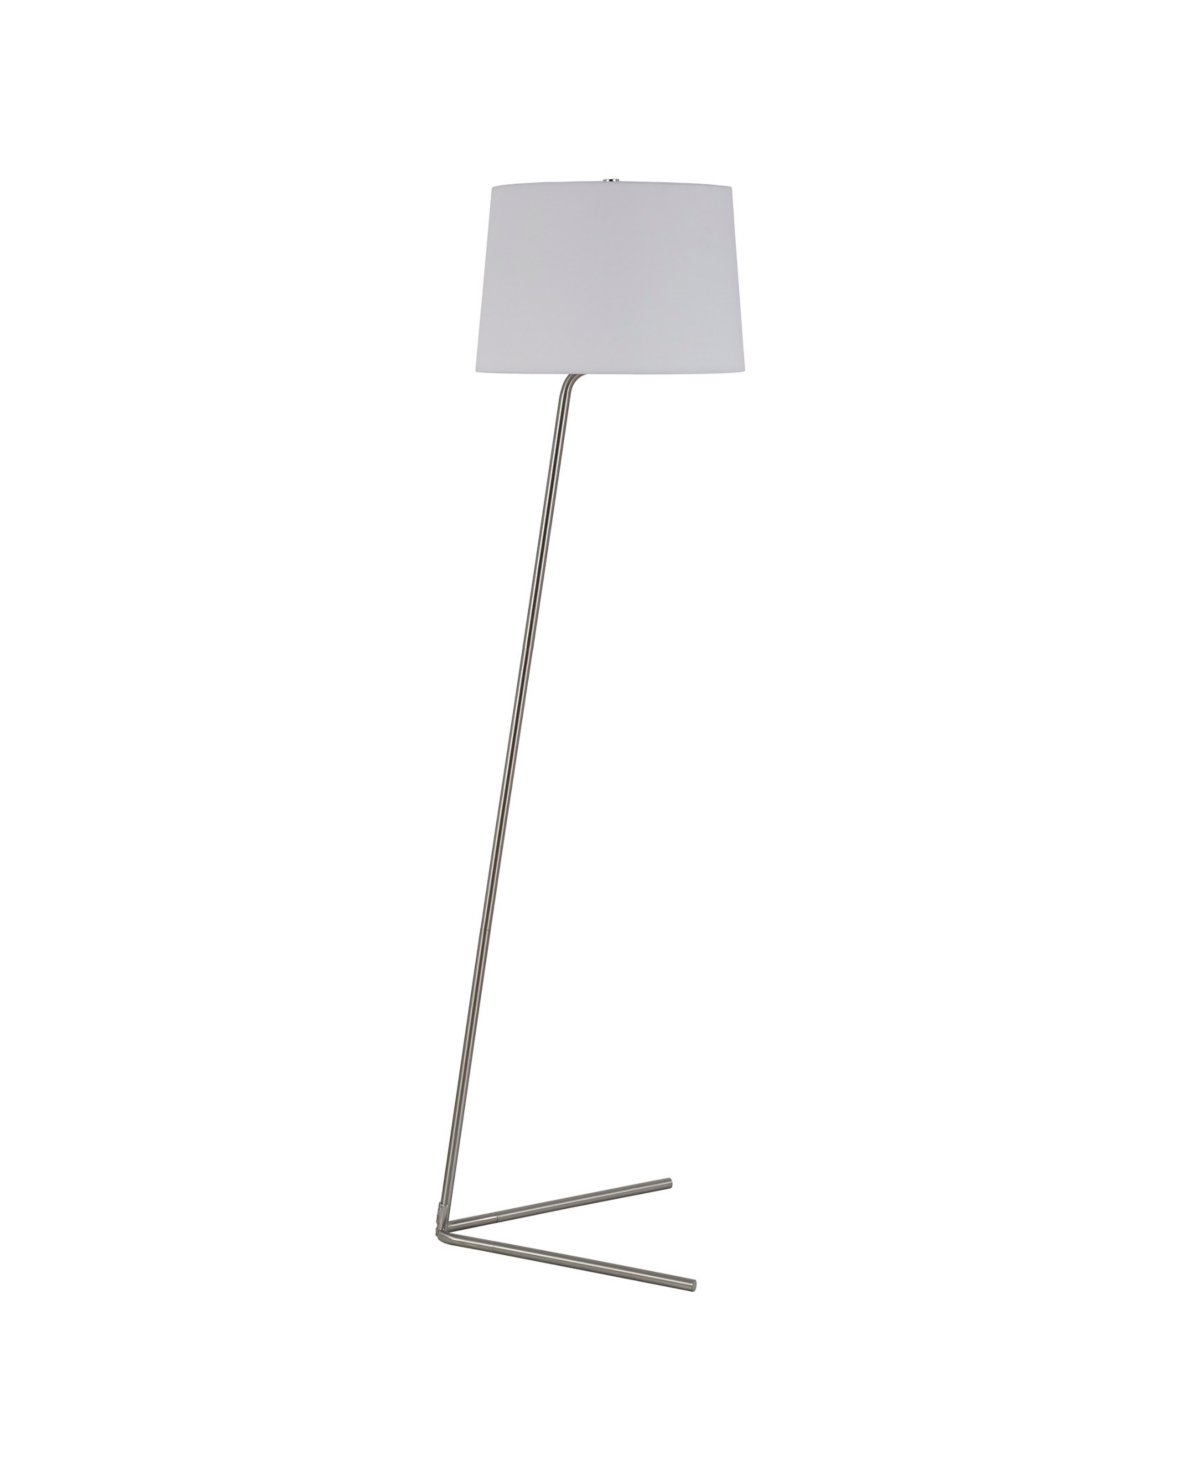 Hudson & Canal Markos 60" Linen Shade Tilted Floor Lamp In Brushed Nickel